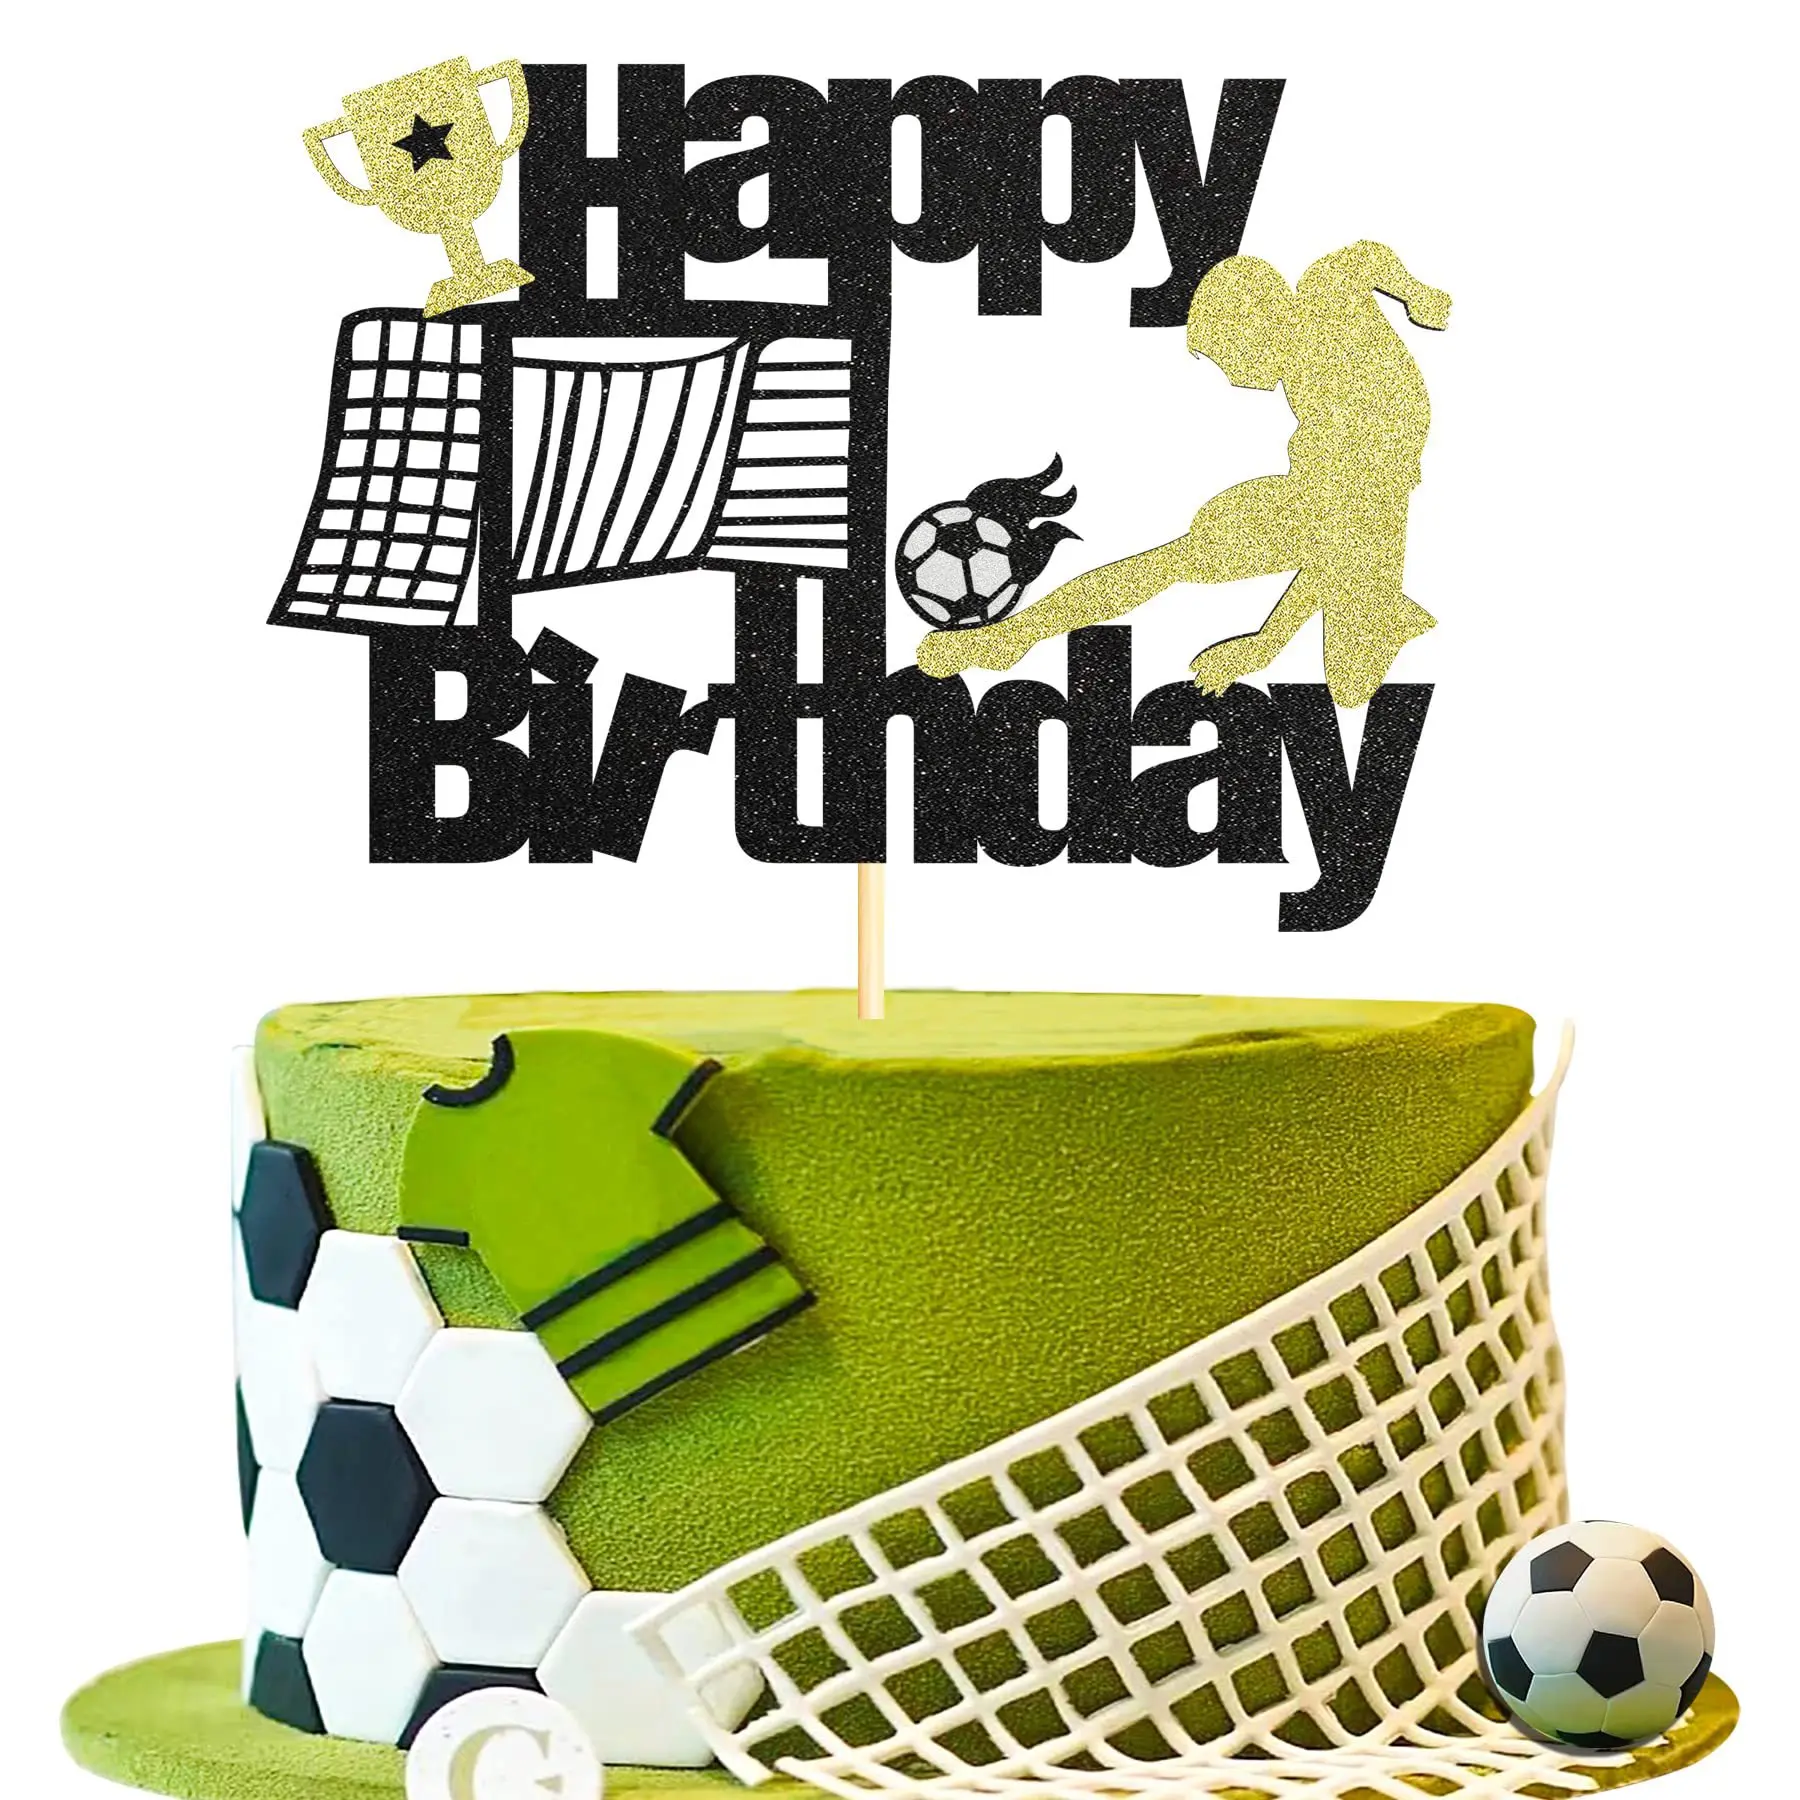 

Football Cake Topper Boy Girl Soccer Happy Birthday Cupcake Toppers Party Dessert Wedding Decoration Baby Shower Baking Supplies